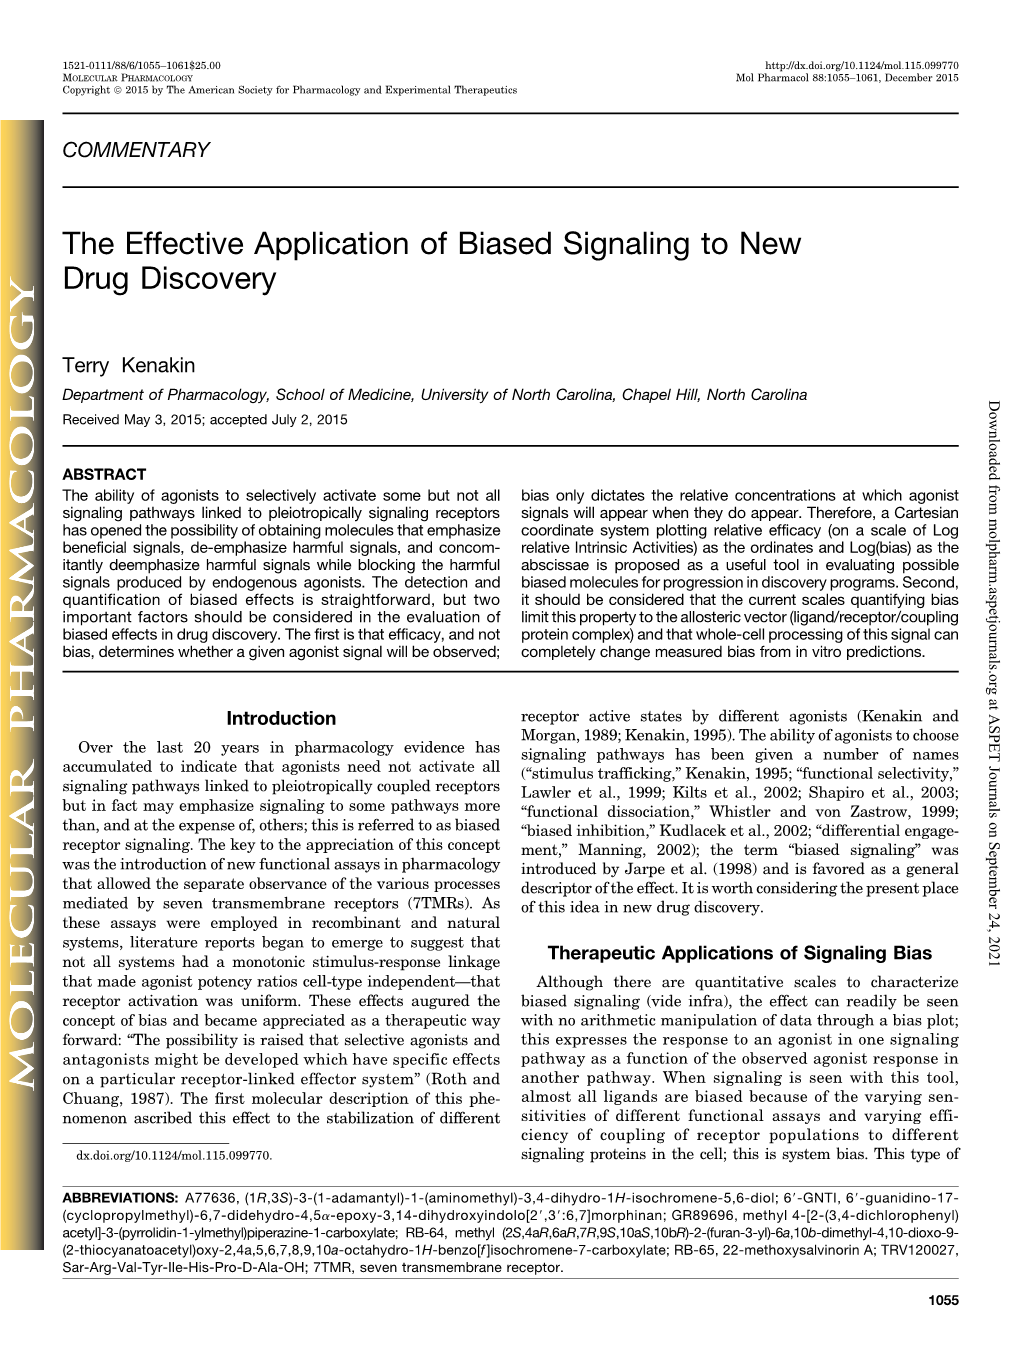 The Effective Application of Biased Signaling to New Drug Discovery